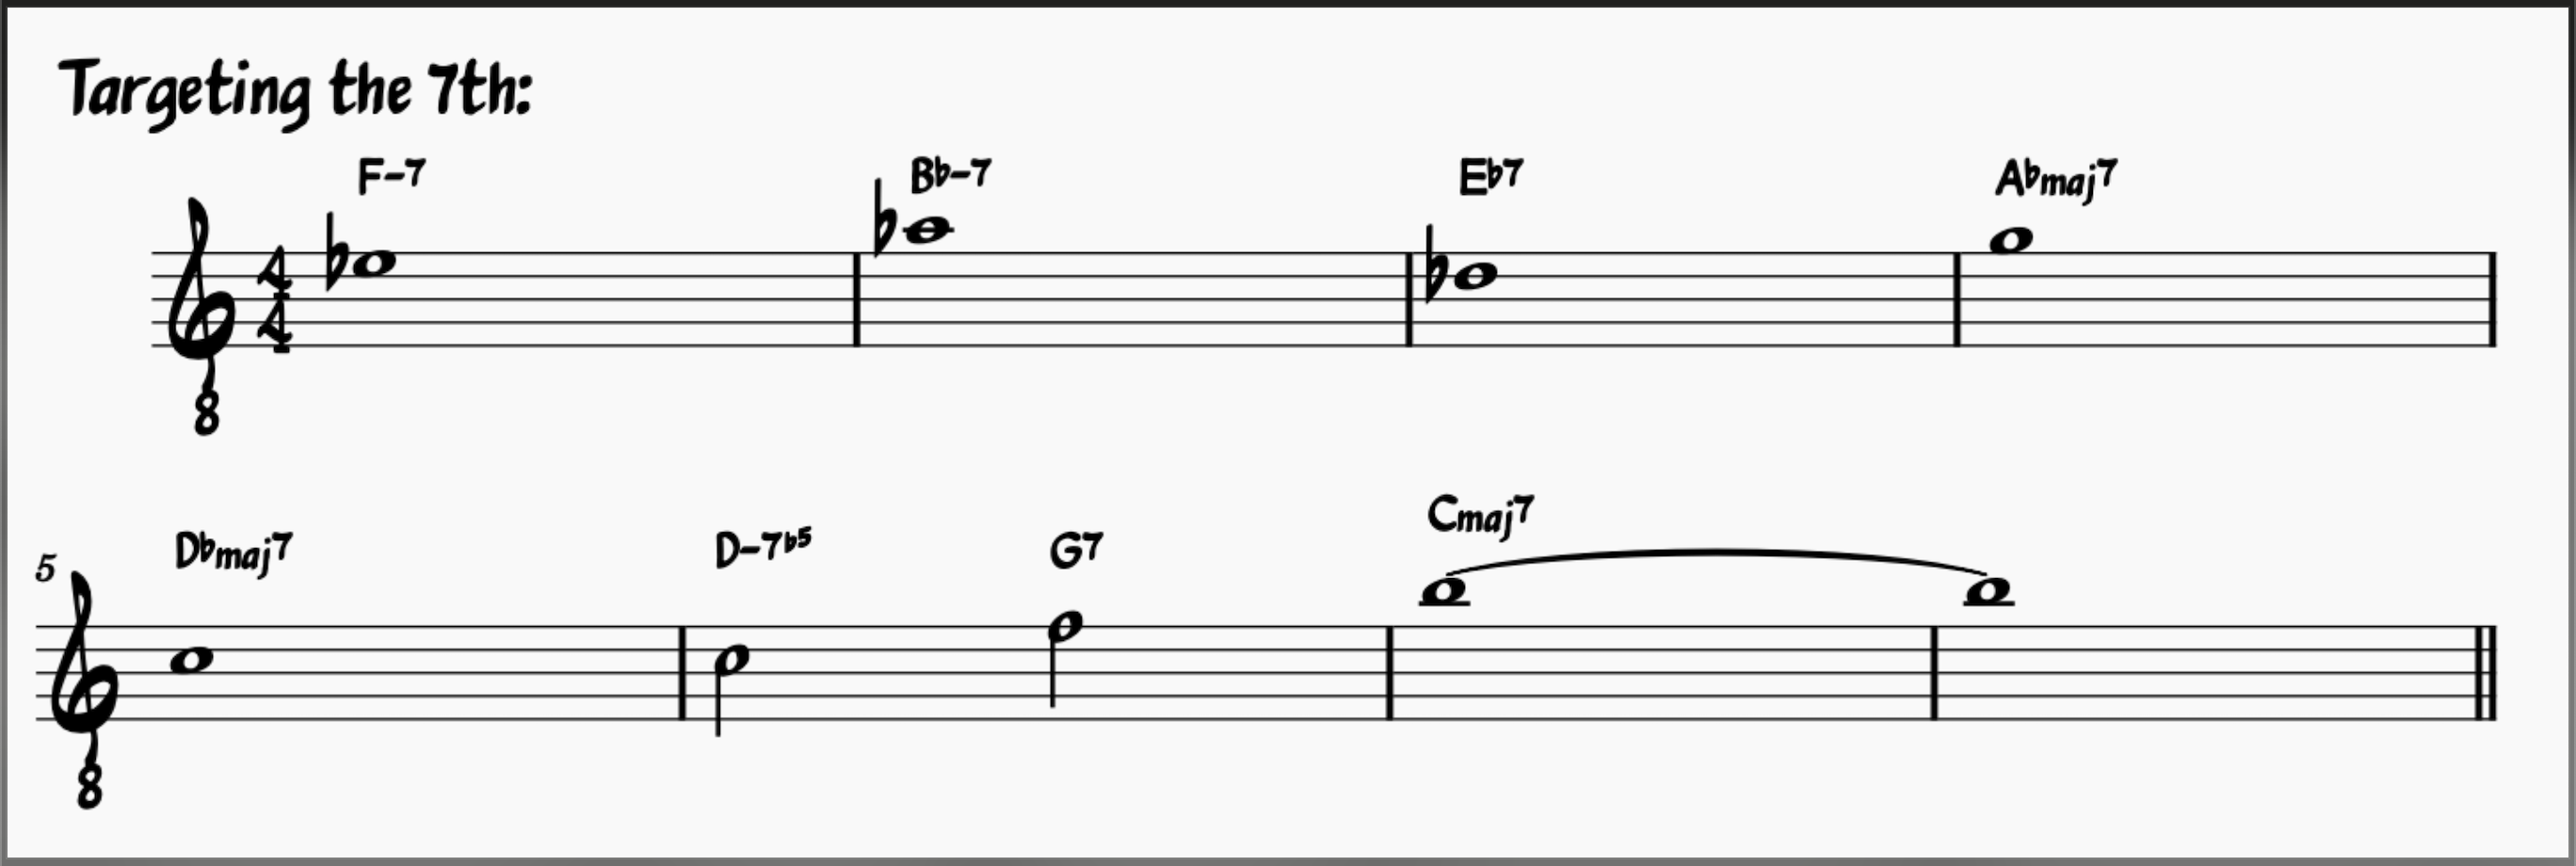 Chord Tone Exercise for All The Things You Are Targeting the 7th